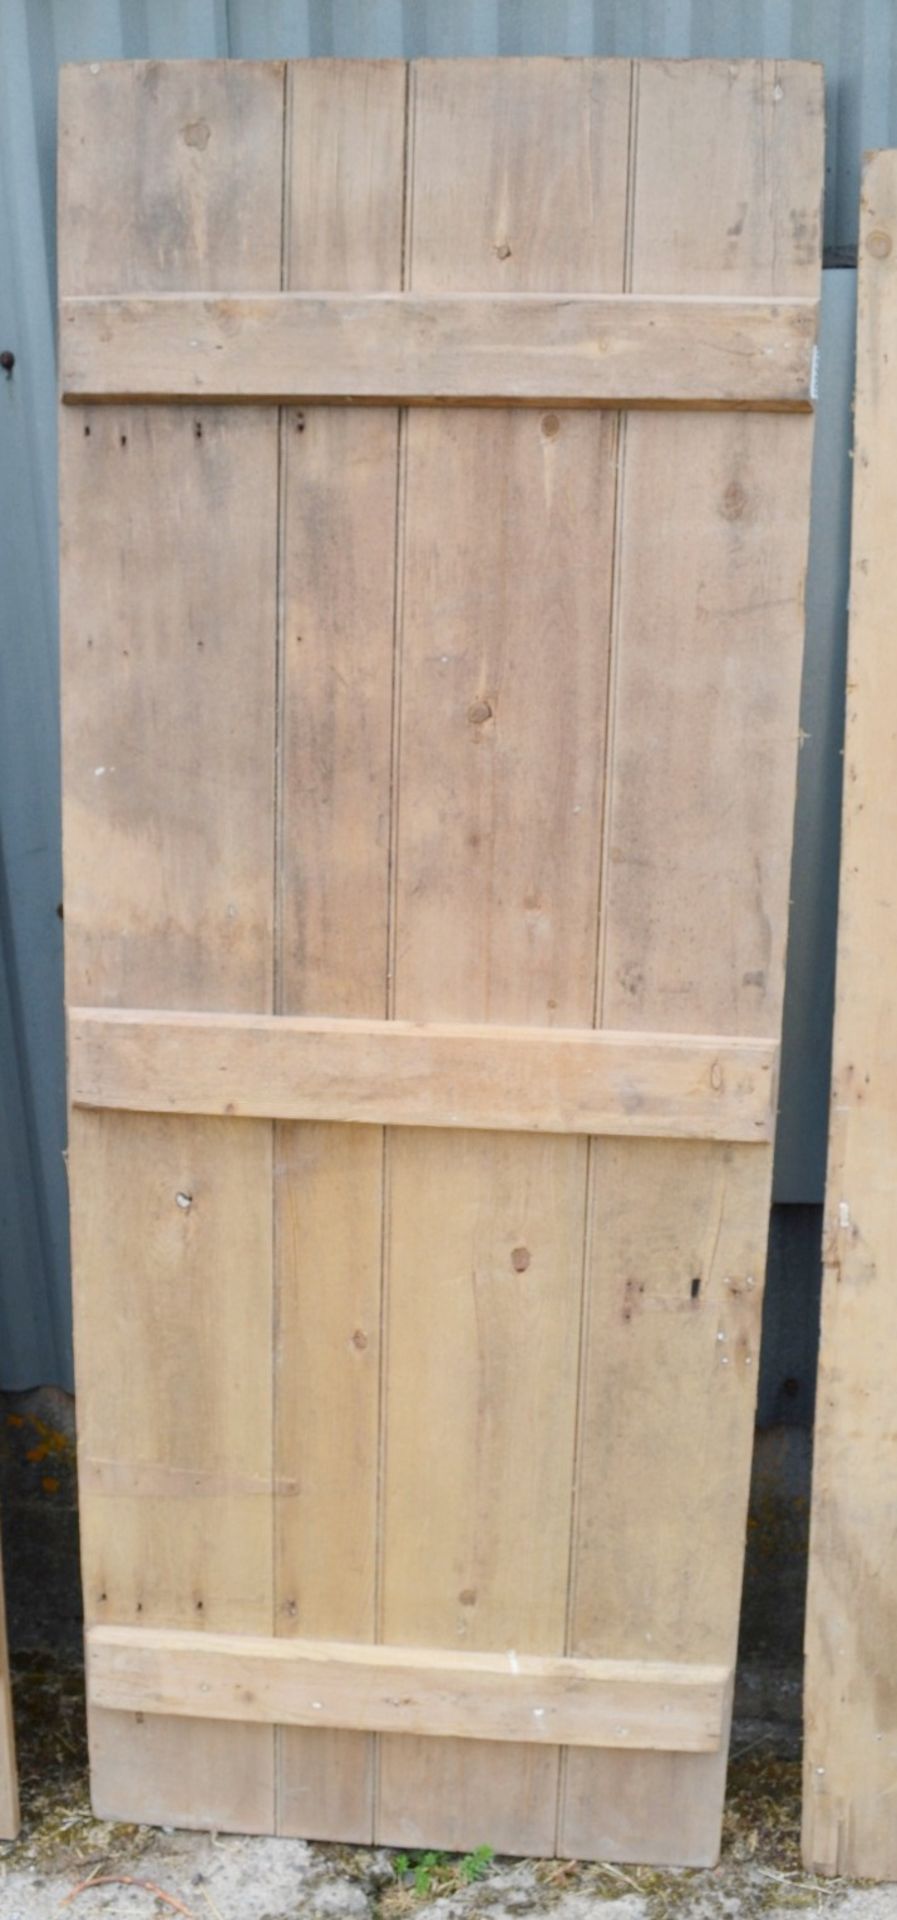 Set Of 4 x Reclaimed Unpainted Wooden Doors - Taken From A Grade II Listed Property - Image 2 of 8